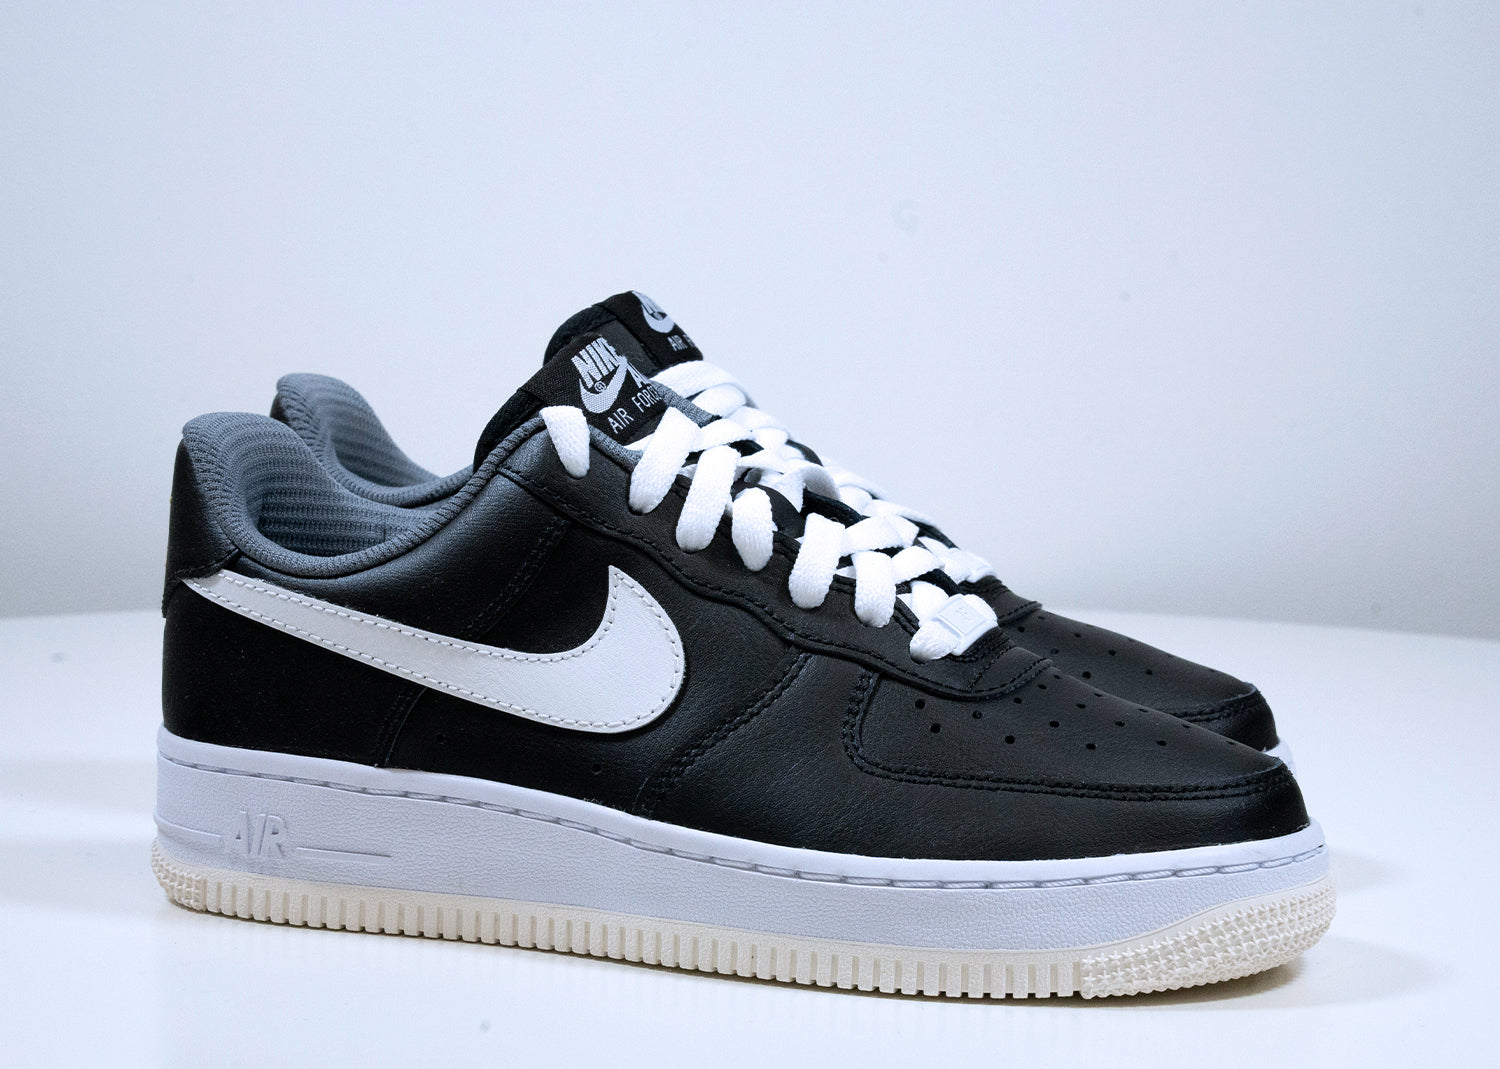 Second Chance - Nike Air bell 1 ID Black/White Swoosh - 37,5 | NEW